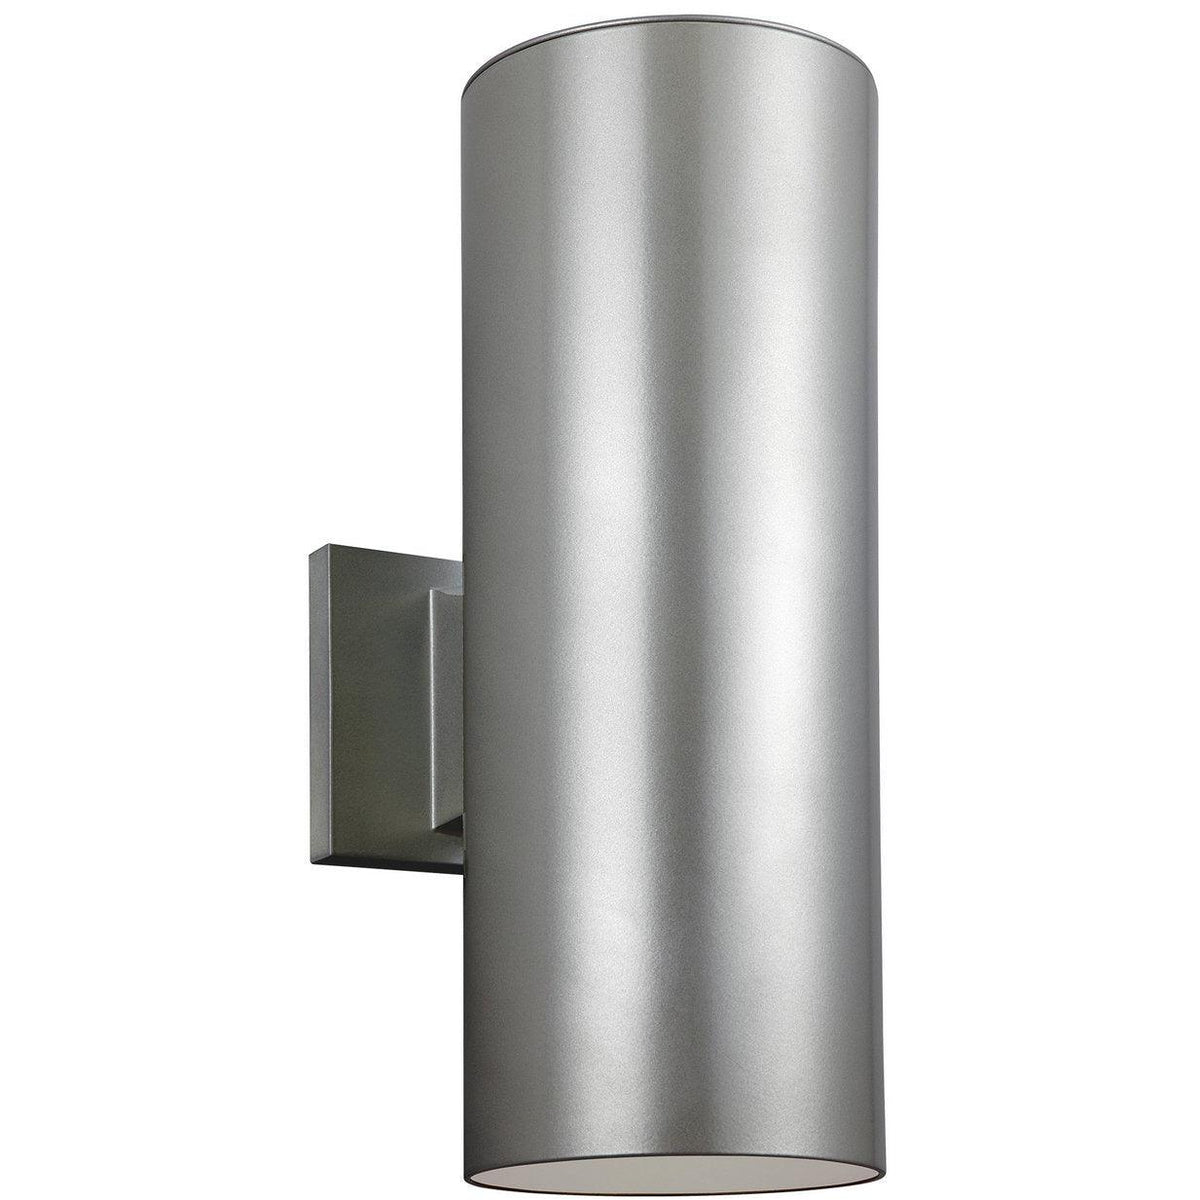 Generation Lighting - Outdoor Cylinders LED Outdoor Wall Sconce - 8413897S-753 | Montreal Lighting & Hardware